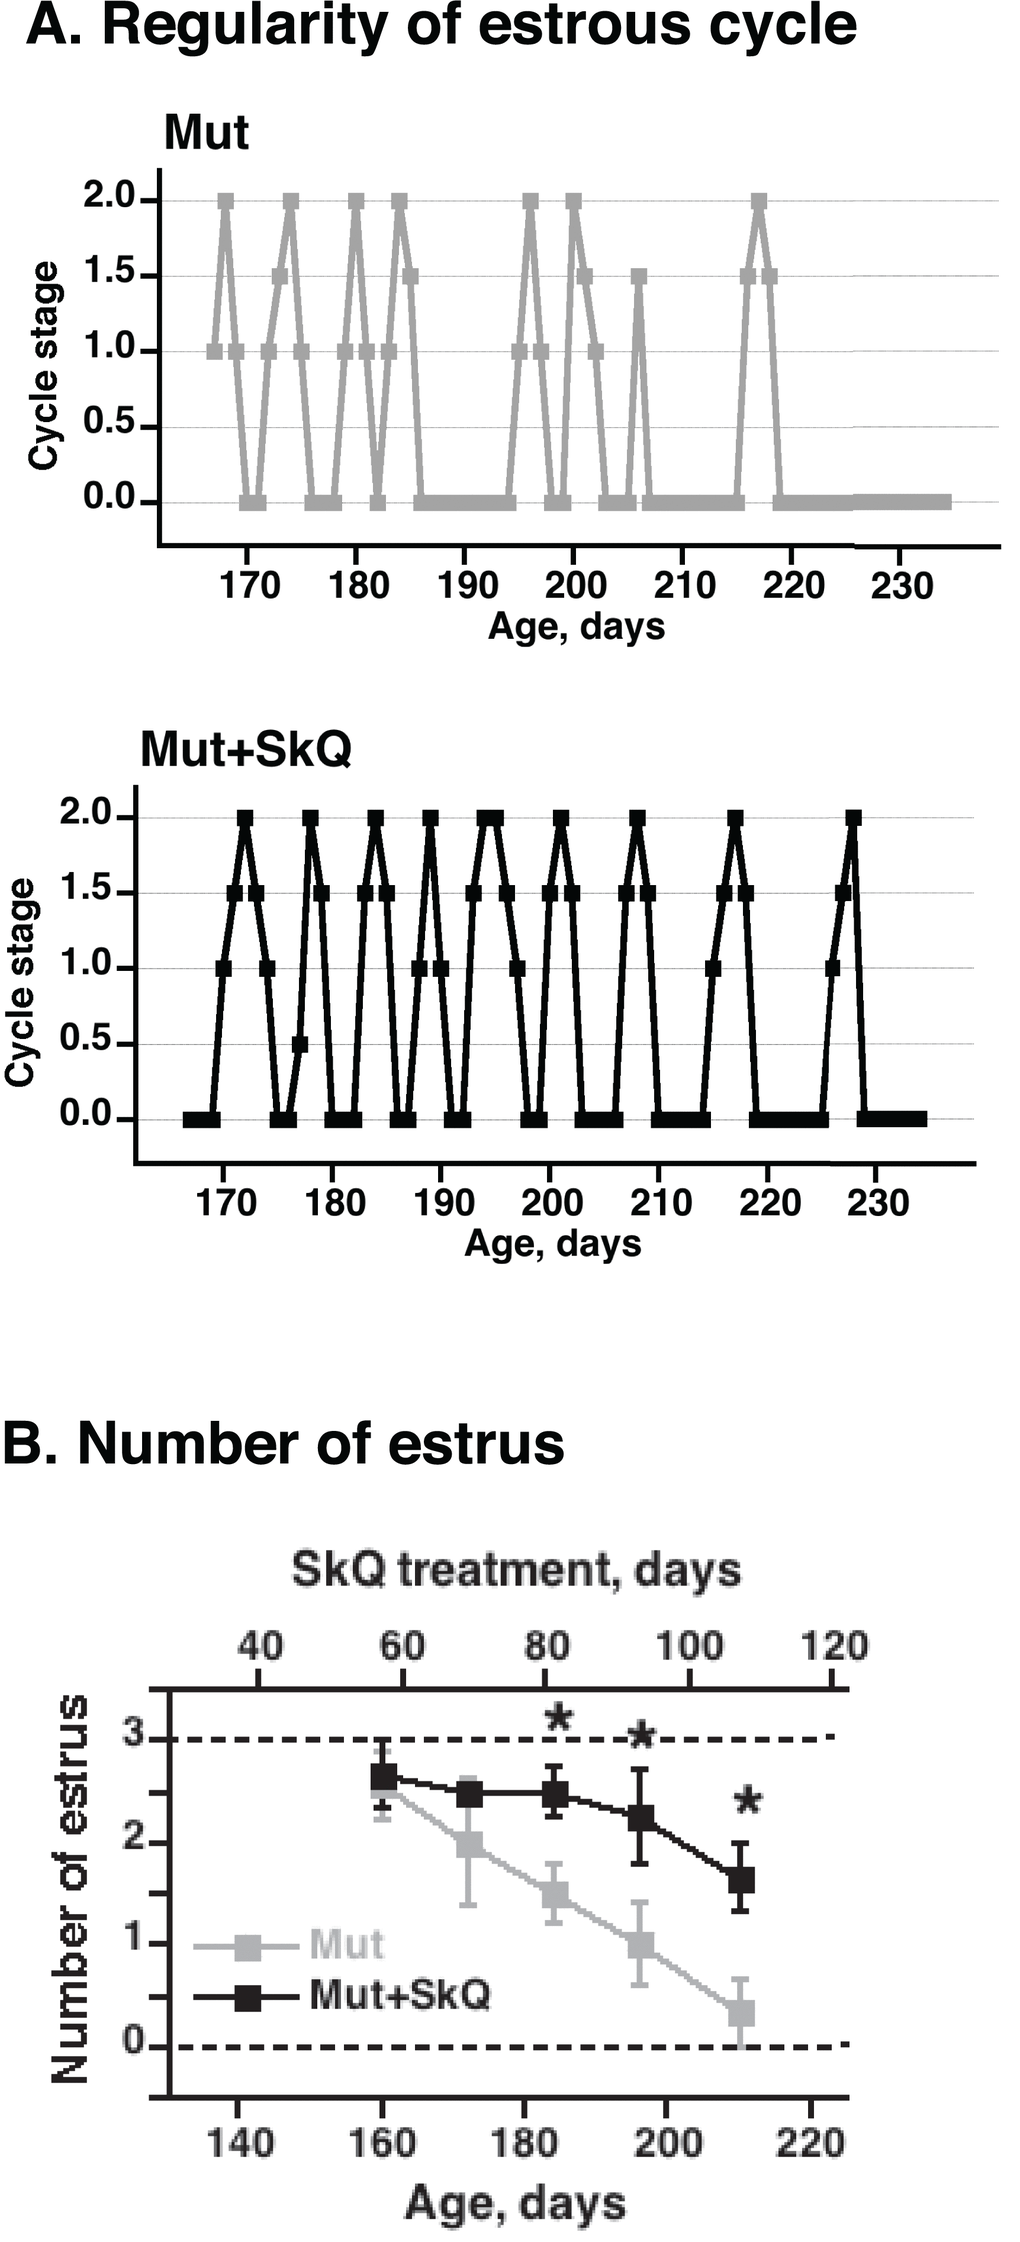 Effects of SkQ1 treatment on estrus cycle in mtDNA mutator mice. (A) Examples of graphs of estrus cycles in non-treated and SkQ-treated mtDNA mutator female mice. Examination of estrus cycle was done by light microscopy of vaginal smears. Estrus was characterized by the presence of large cornified cells with degenerated nuclei and was indicated as estrus stage 2 on the graphic presentation. Diestrus was identified by presence of leucocytes and mucous and was indicated as 0 on graphs. Proestrus and metestrus were characterized by the presence of nucleated epithelial cells or leucocytes together with cornified cells and were indicated on the graphs as intermediate stages 0.5 – 1.5. (B) Number of estruses during 12 days measured as a function of age (± 7 days). The points are means ± S.E. of 7-8 female mice for each group. * indicates a statistically significant difference between non-treated and SkQ1-treated mice (p 